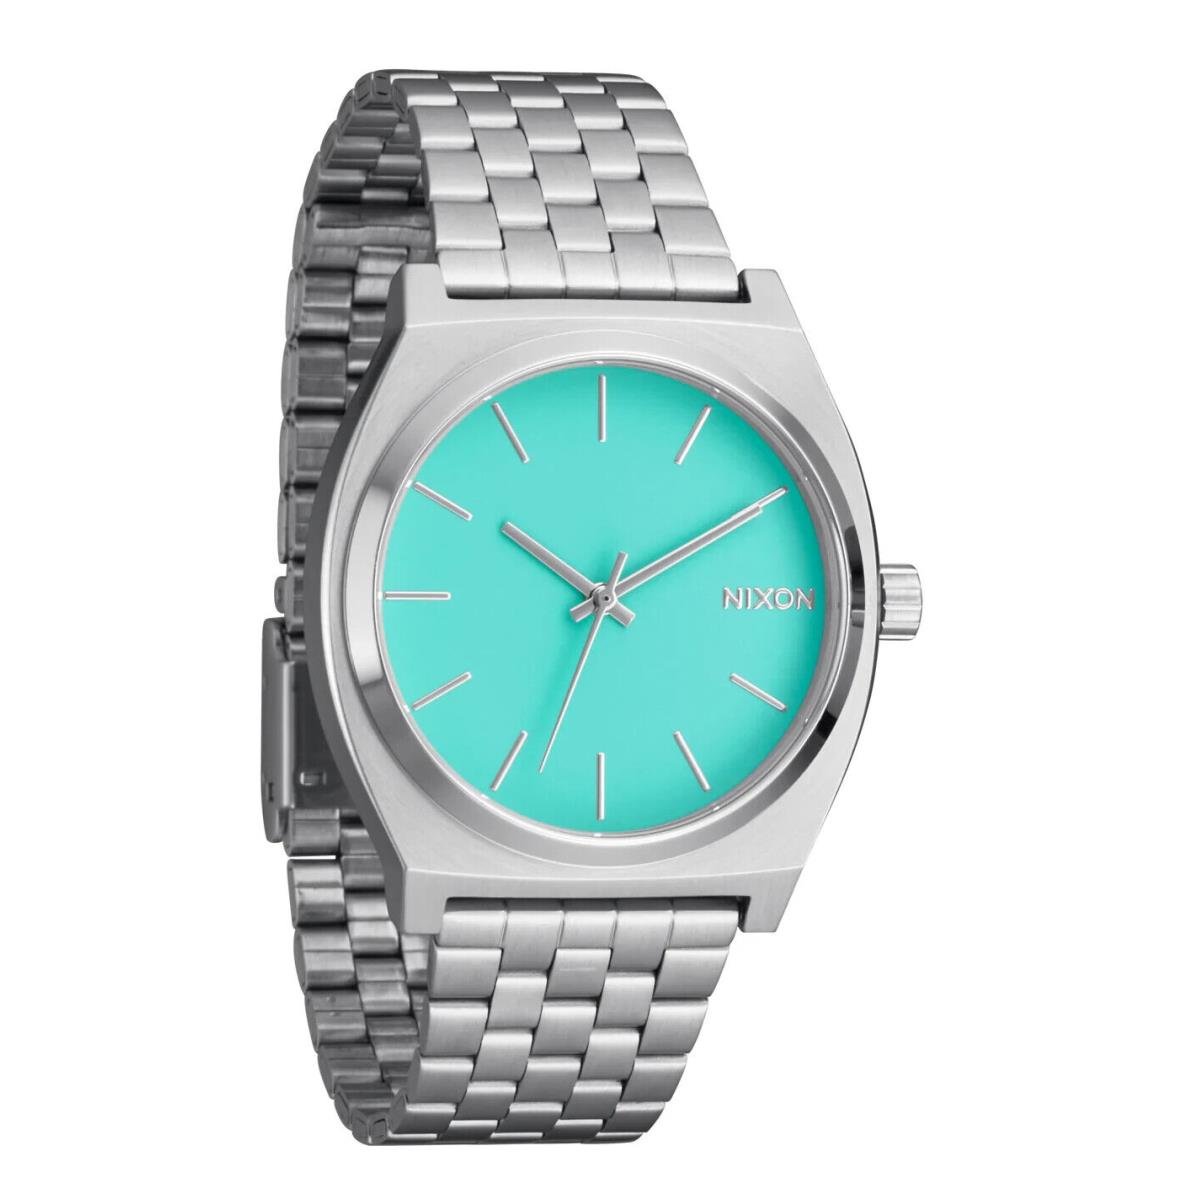 Nixon Men`s Watch Time Teller Watch Silver / Turquoise - Silver, Turquoise